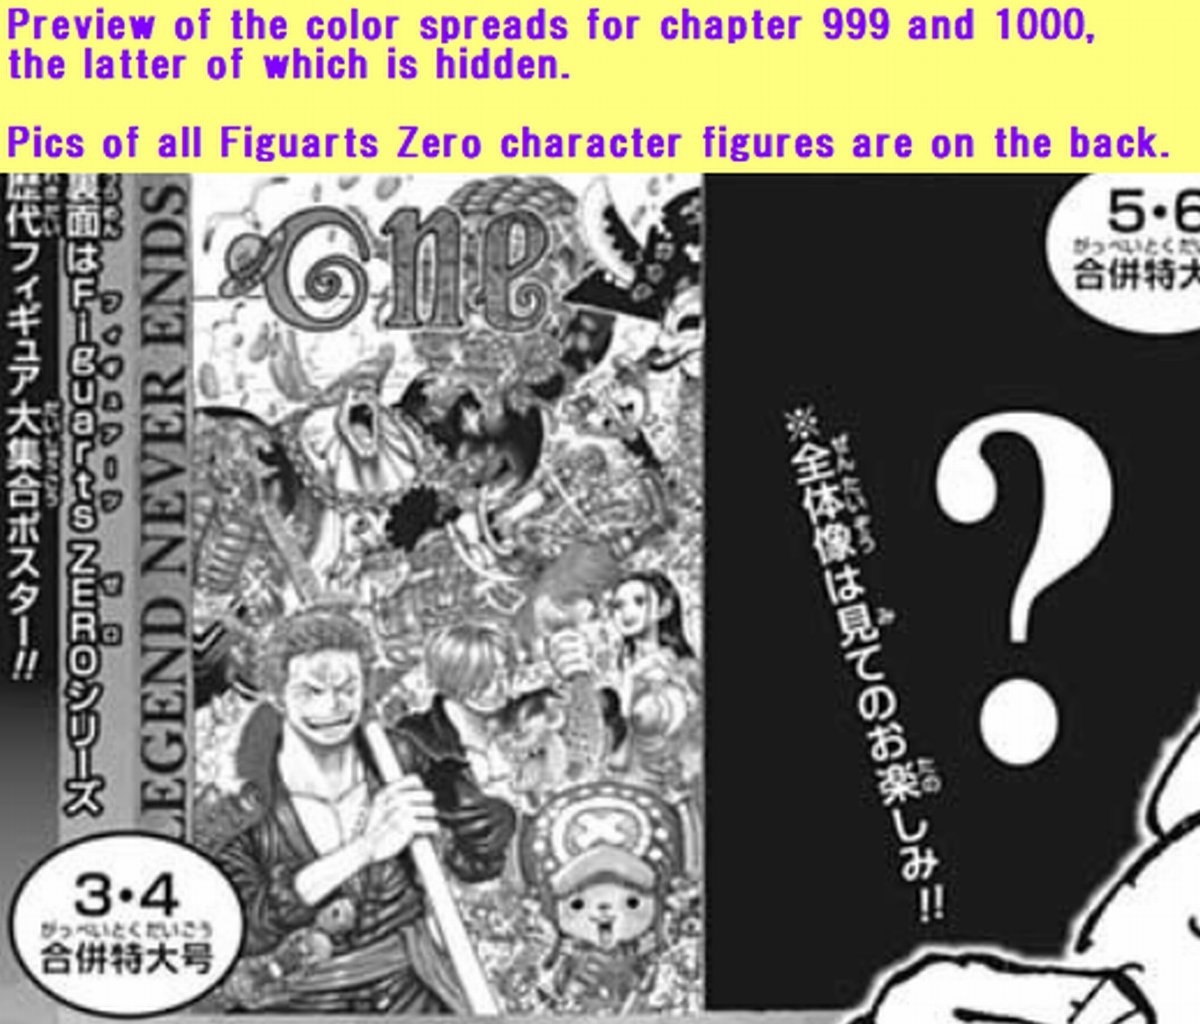 Sandman Both One Piece Color Spreads And Jump Cover Pages For Chapter 999 And 1000 Can Be Combined Current Jump Mangakas Draw Many Op Characters In The Covers The Combined